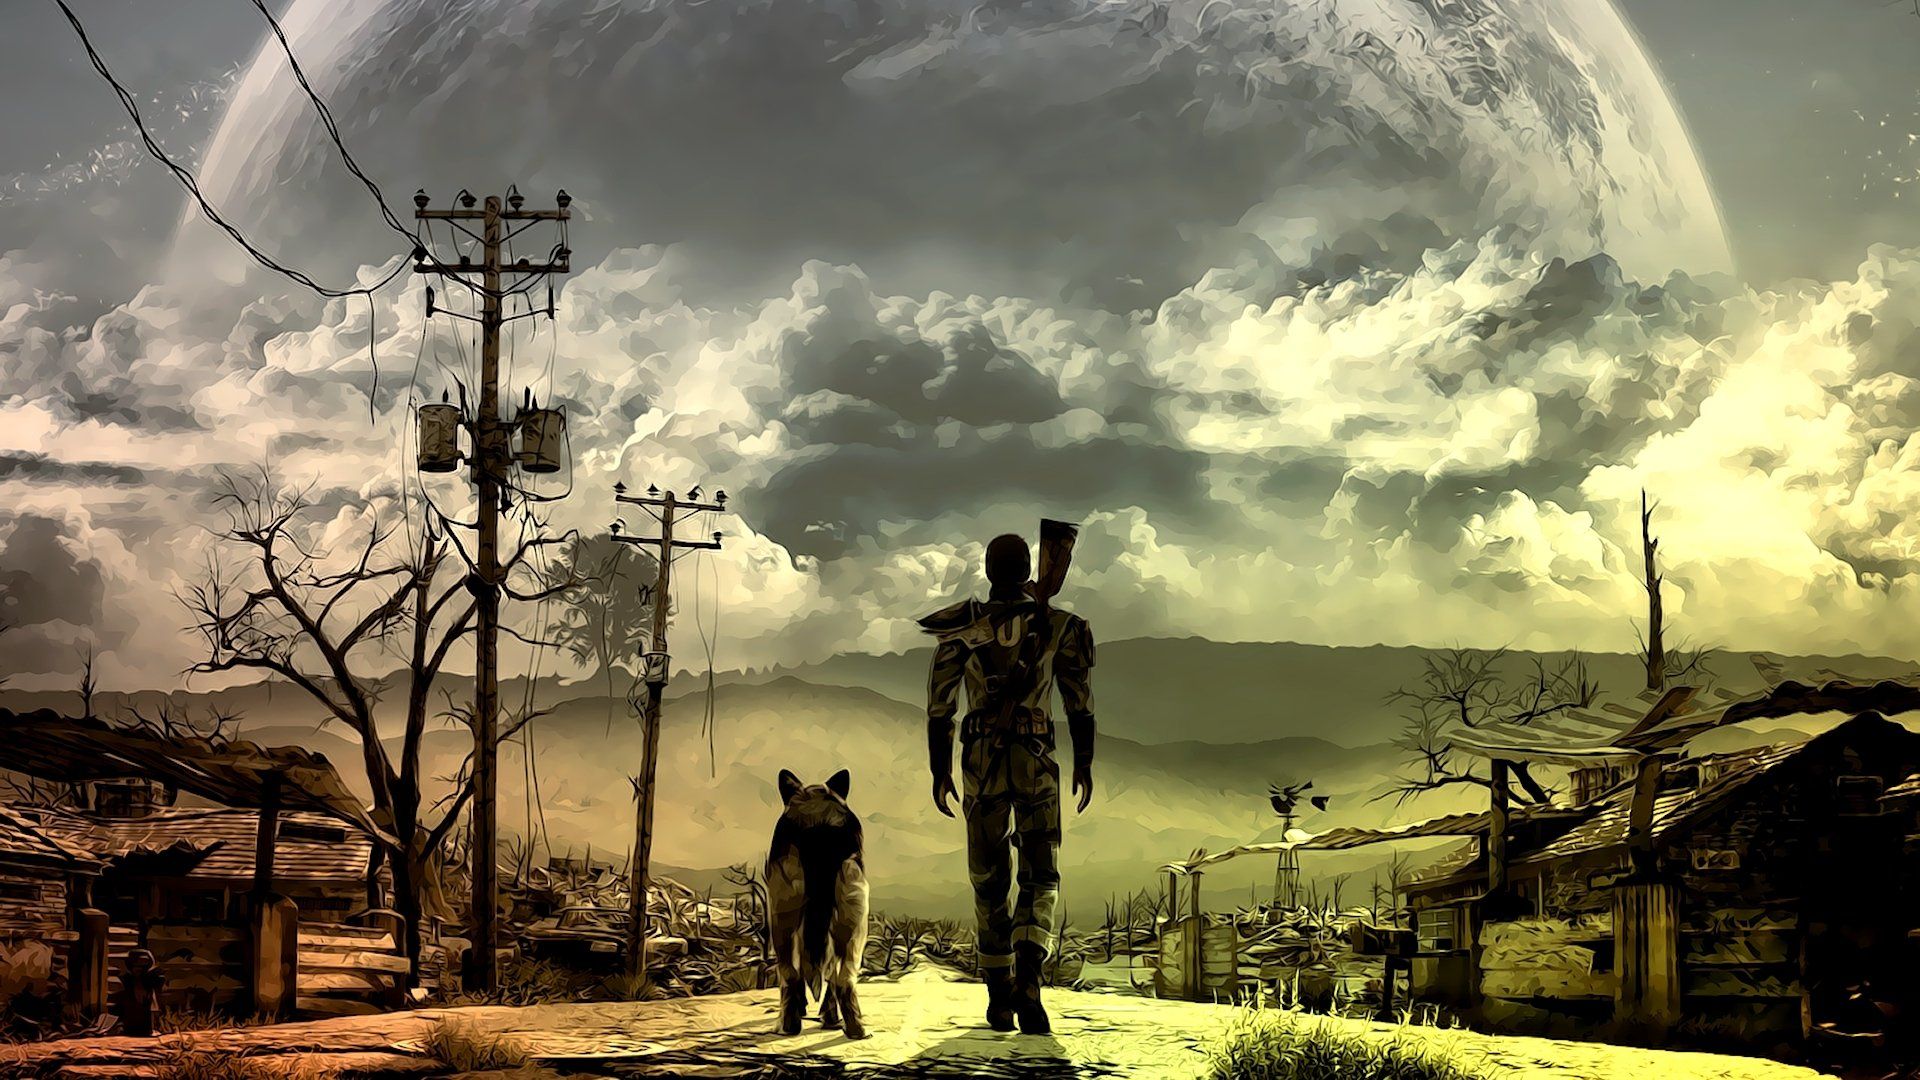 Fallout3 Background